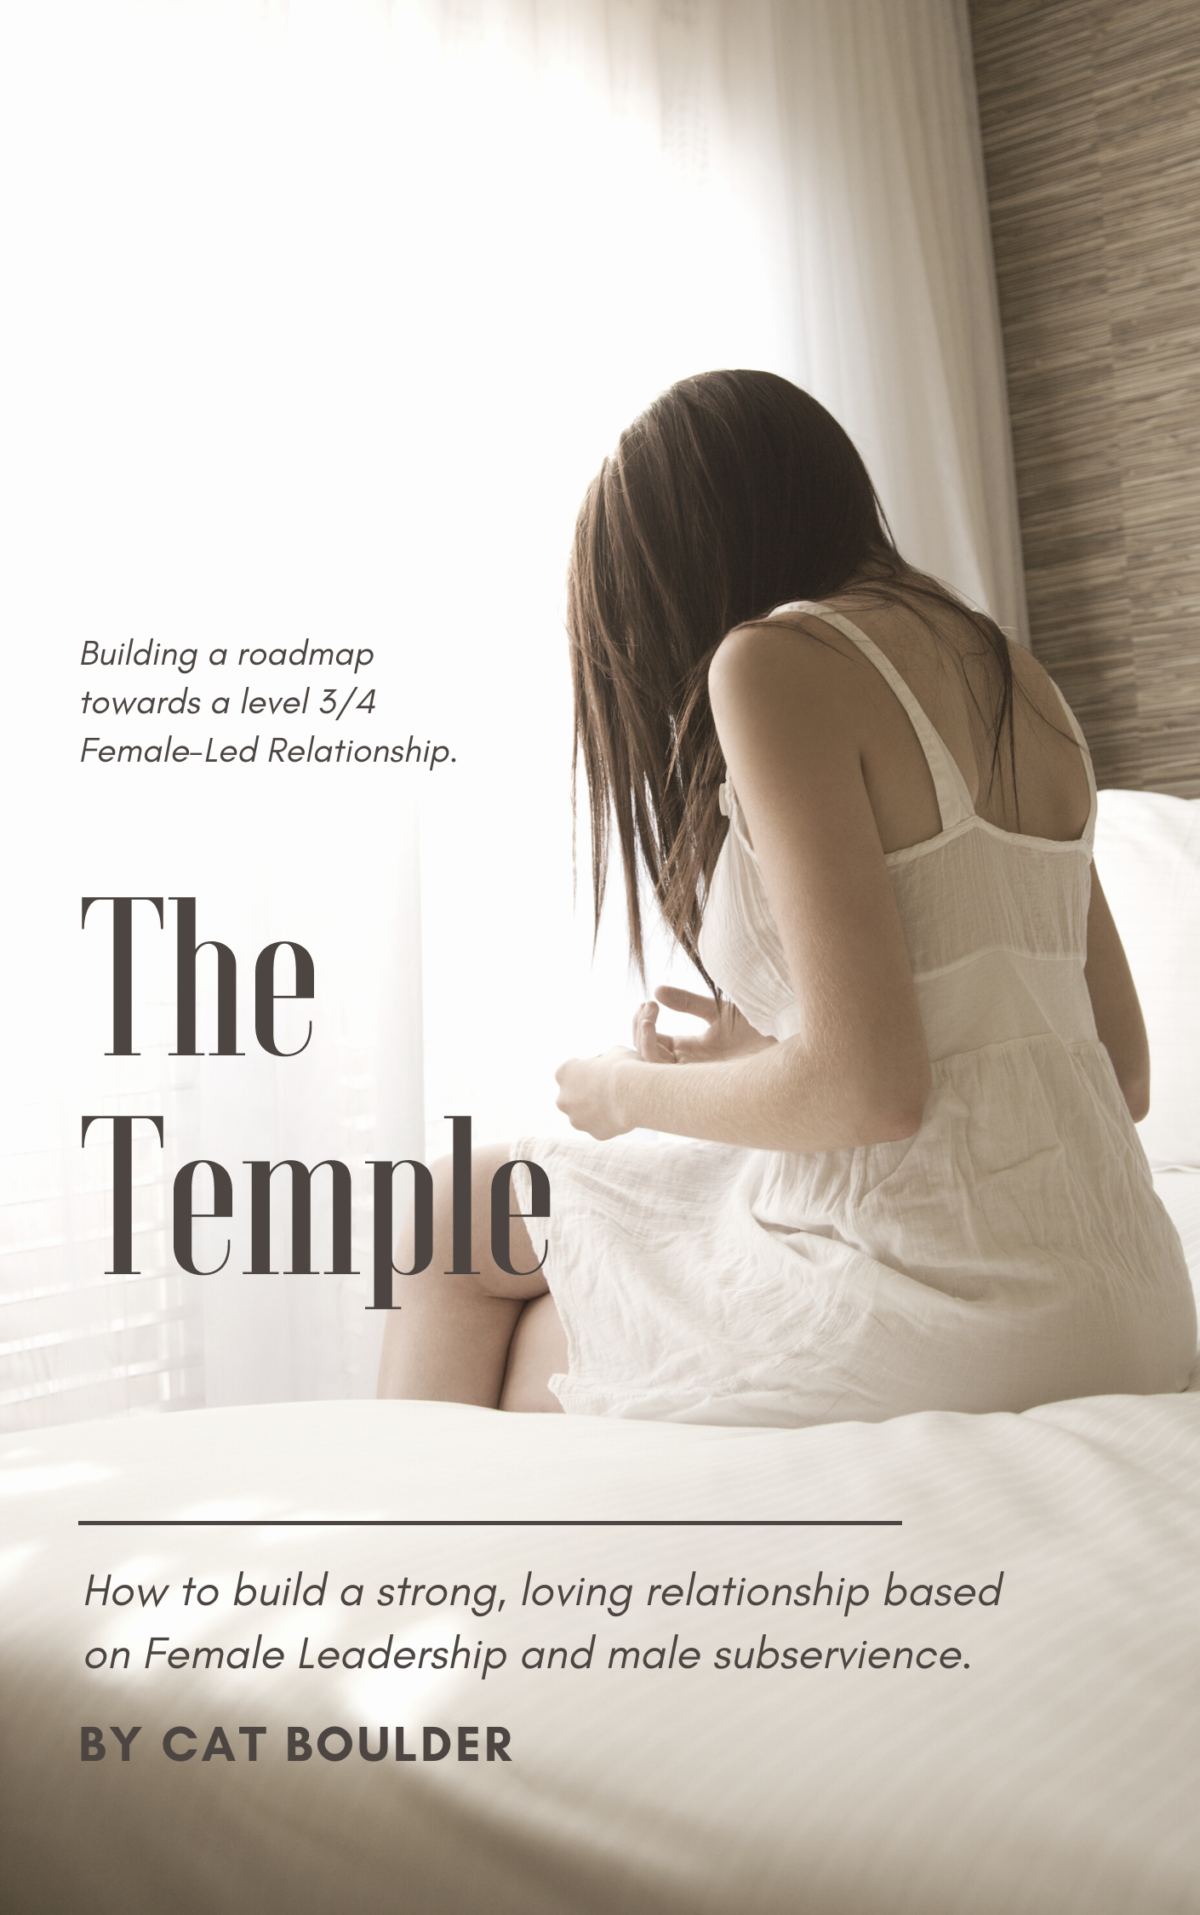 A New Era of Female Empowerment: “The Temple” Book Arrives Soon